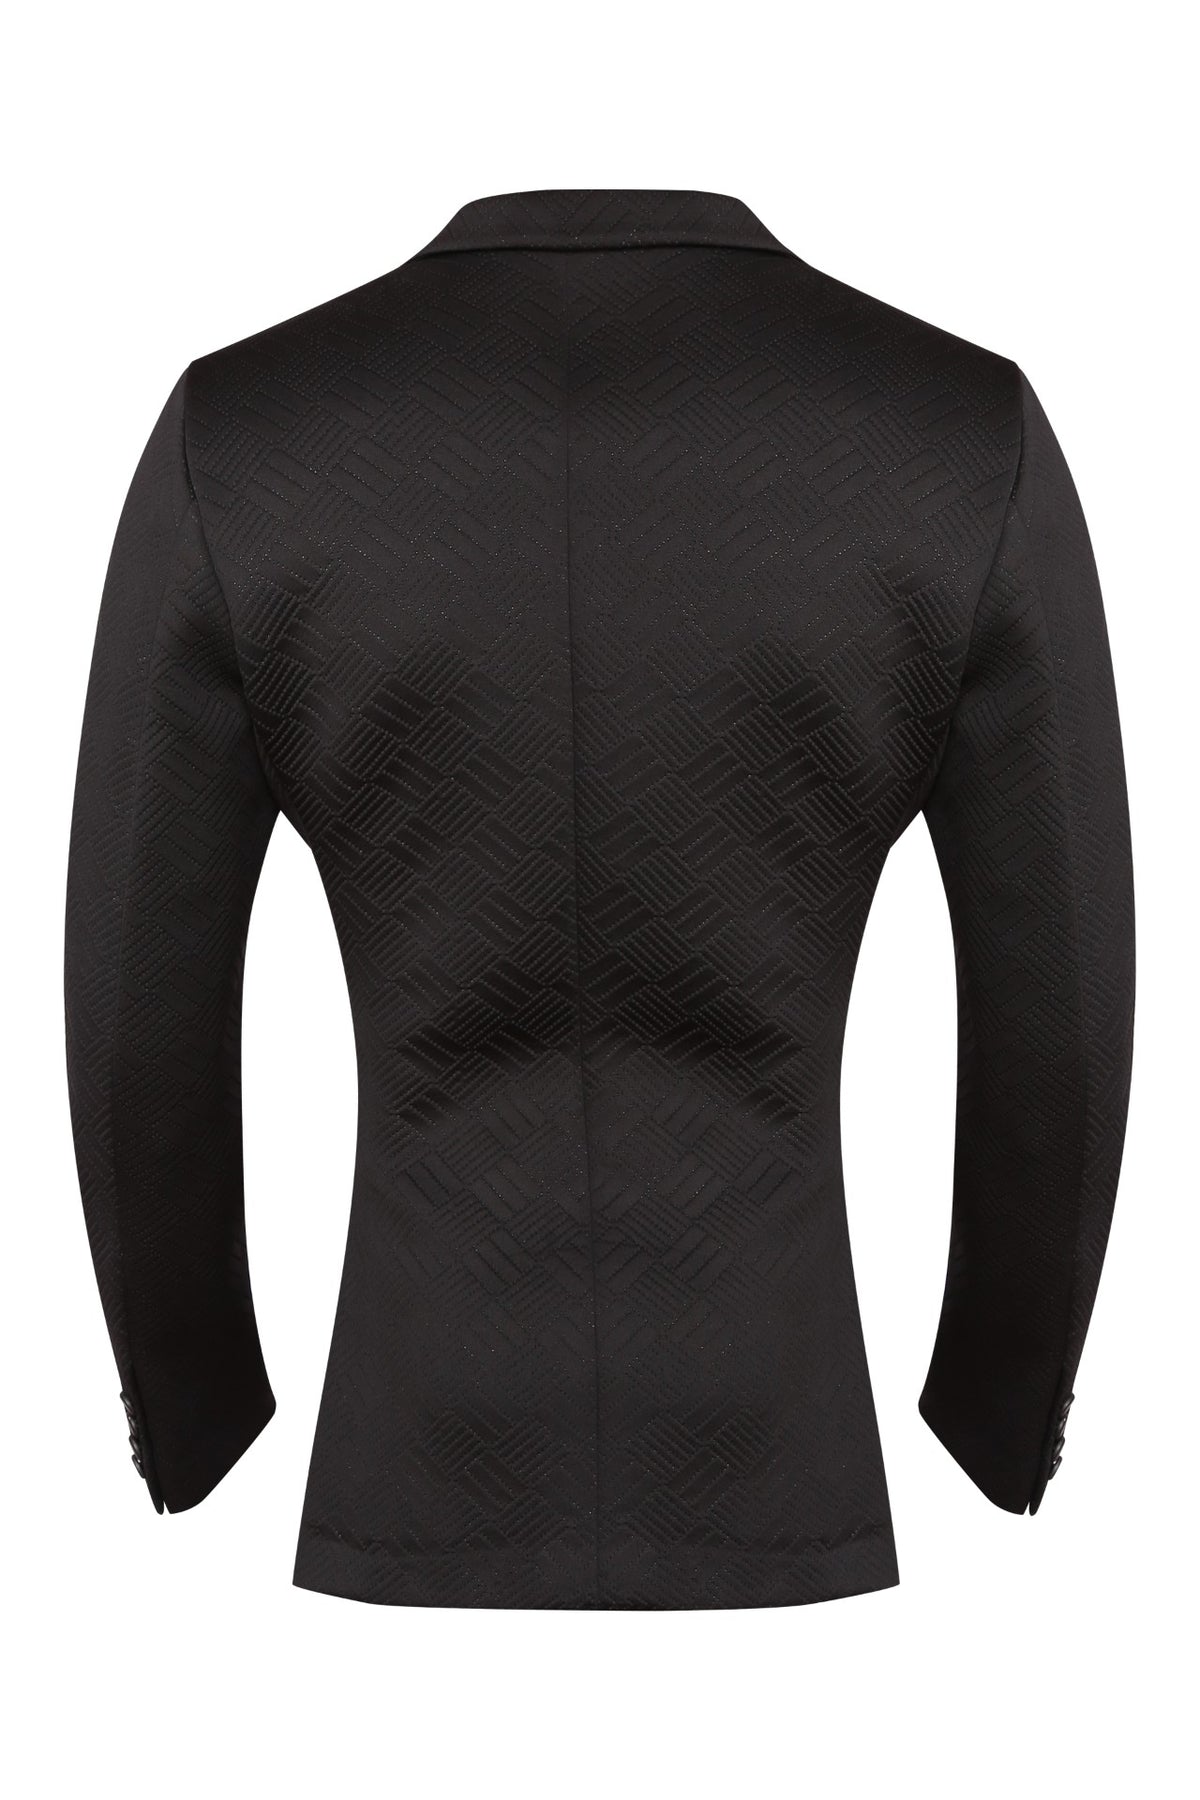 Black embossed scuba jacket with notch collar